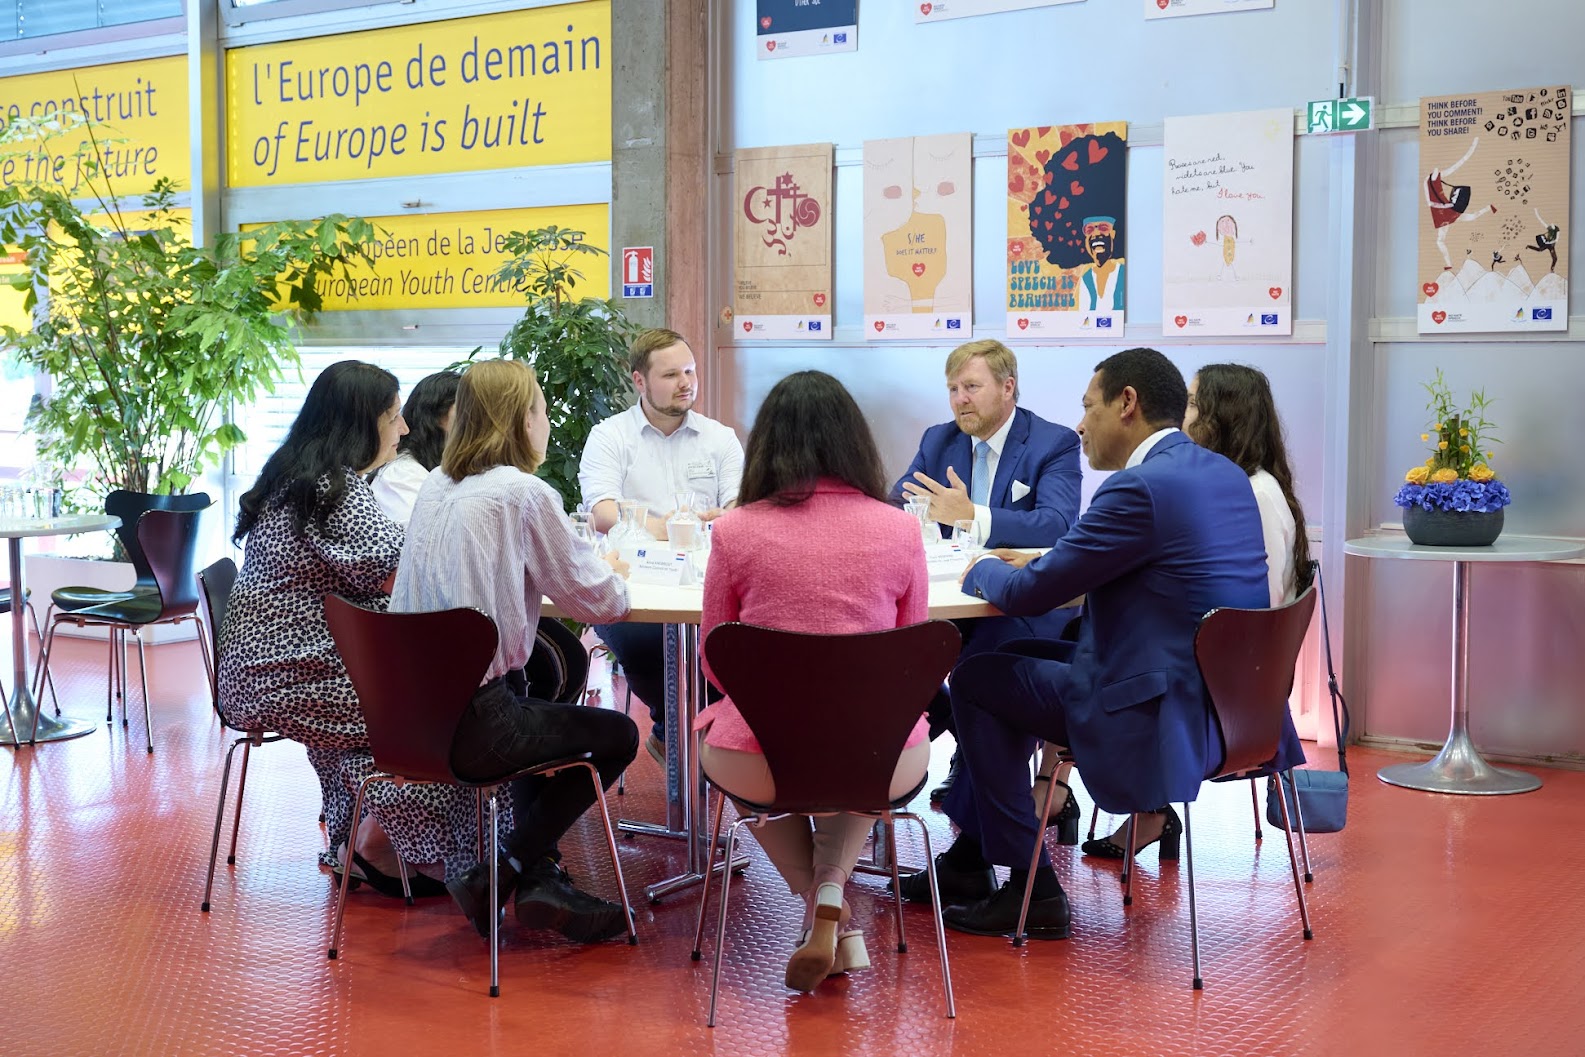 HRM King Willem-Alexander of the Netherlands  meets  with young people in the European Youth Centre Strasbourg (EYCS)